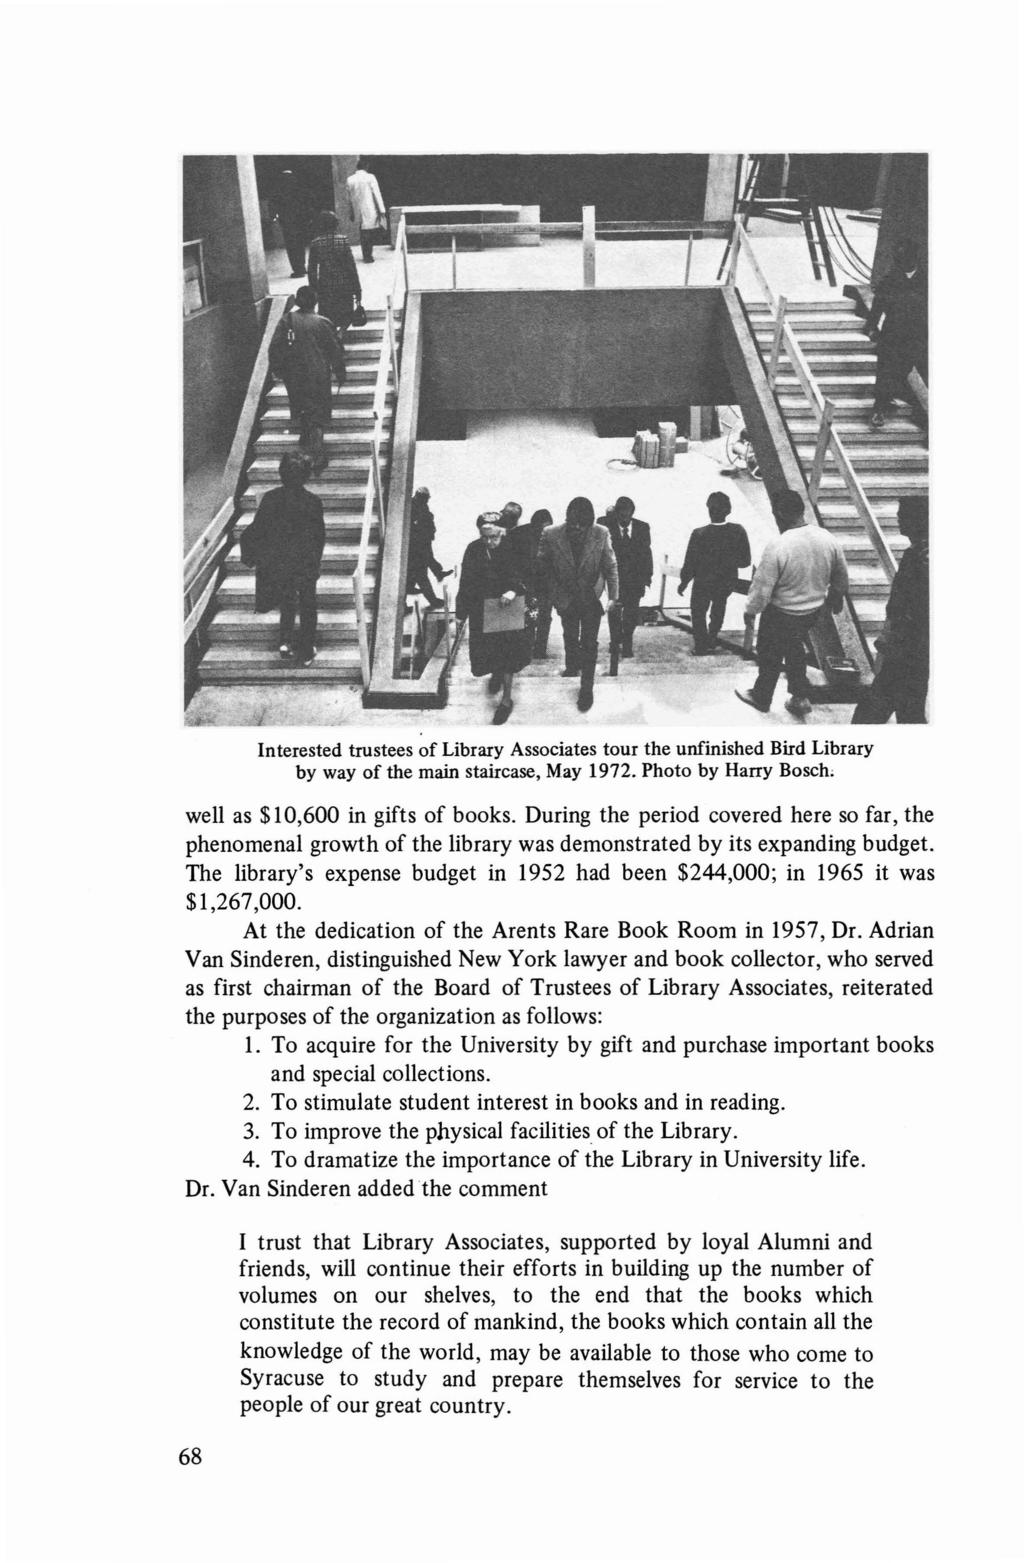 Interested trustees of Library Associates tour the unfinished Bird Library by way of the main staircase, May 1972. Photo by Harry Bosch; well as $10,600 in gifts of books.